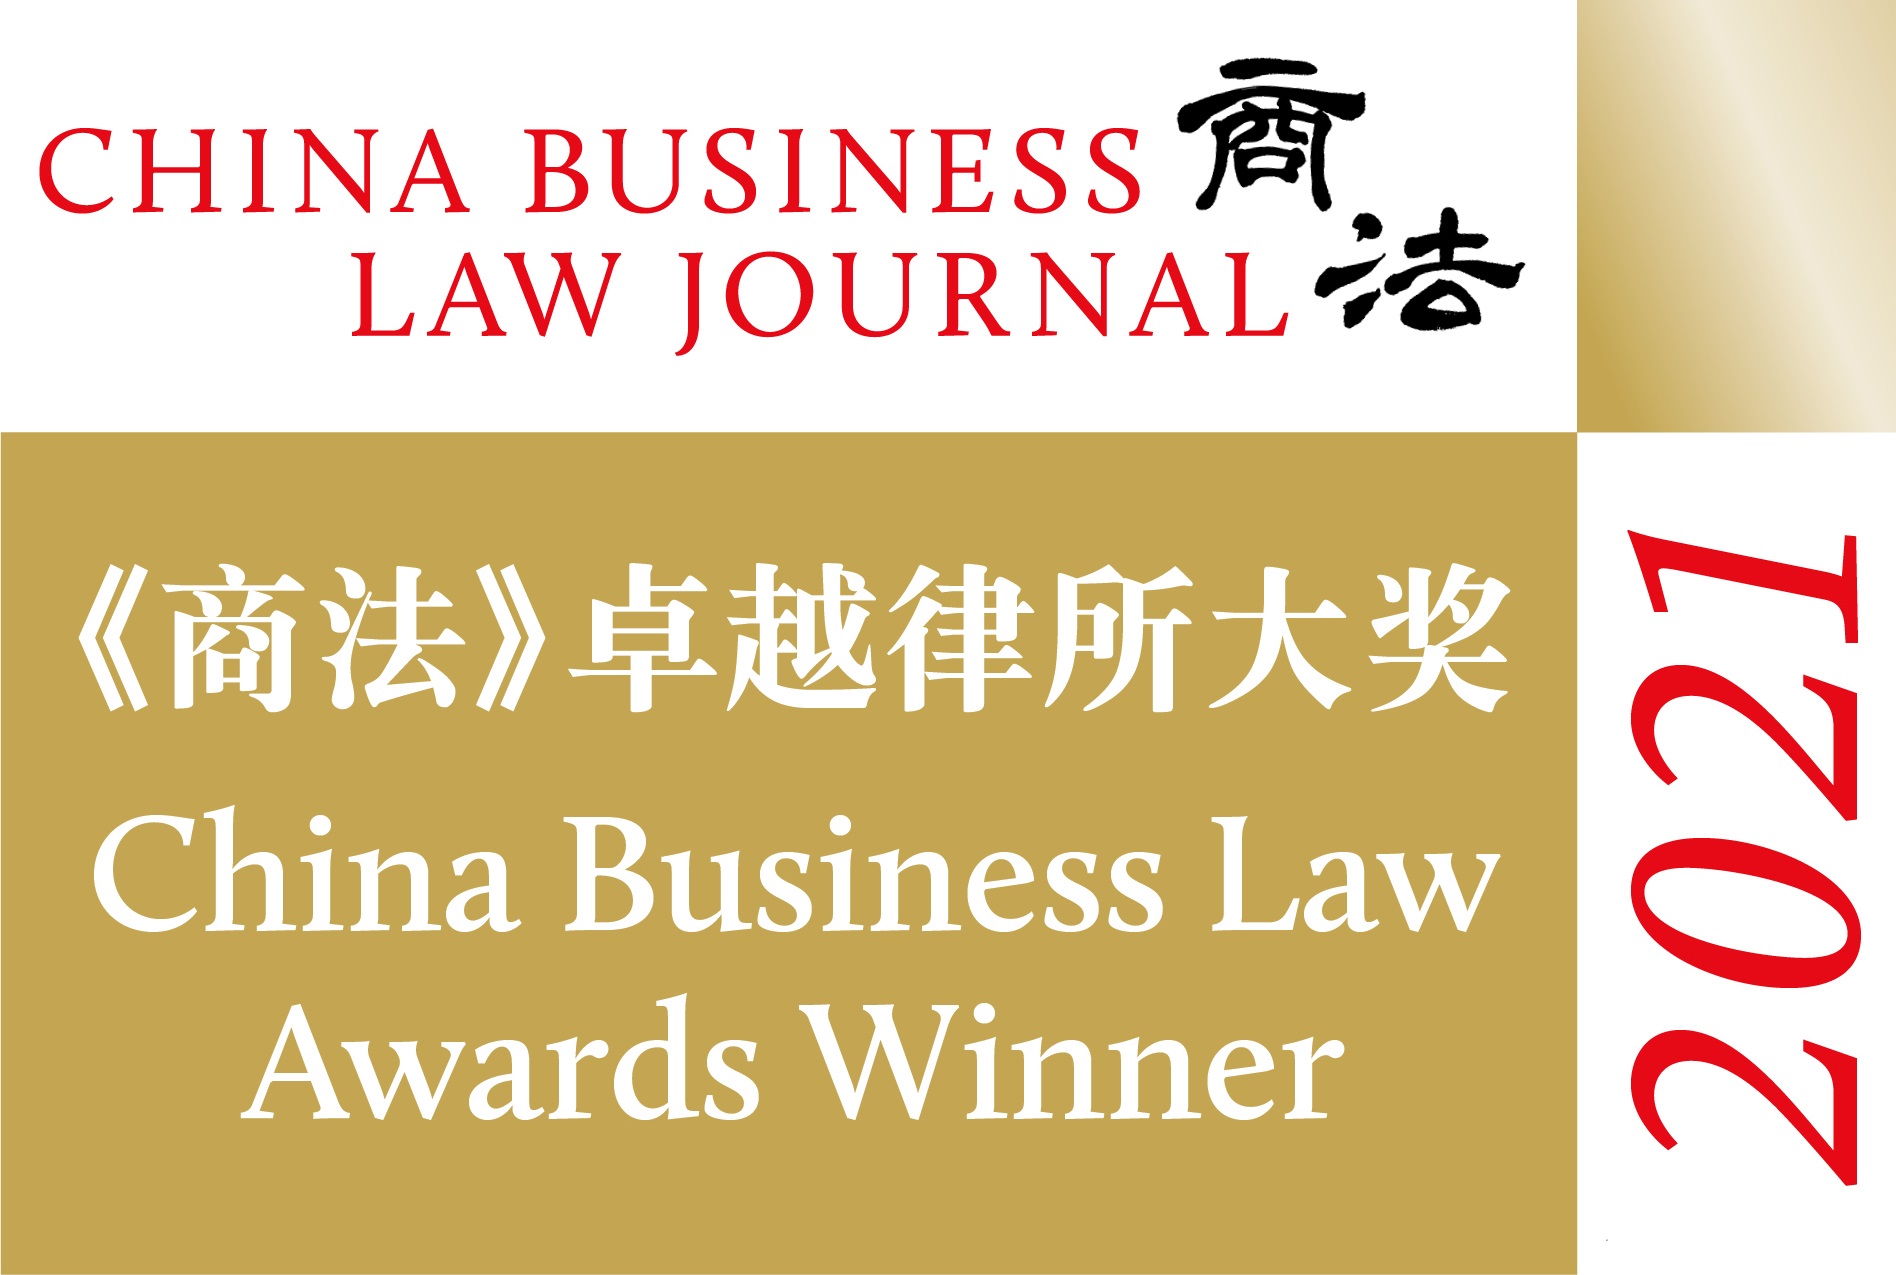 Pro-bono and Technology & telecom categories in China Business Law Awards 2021